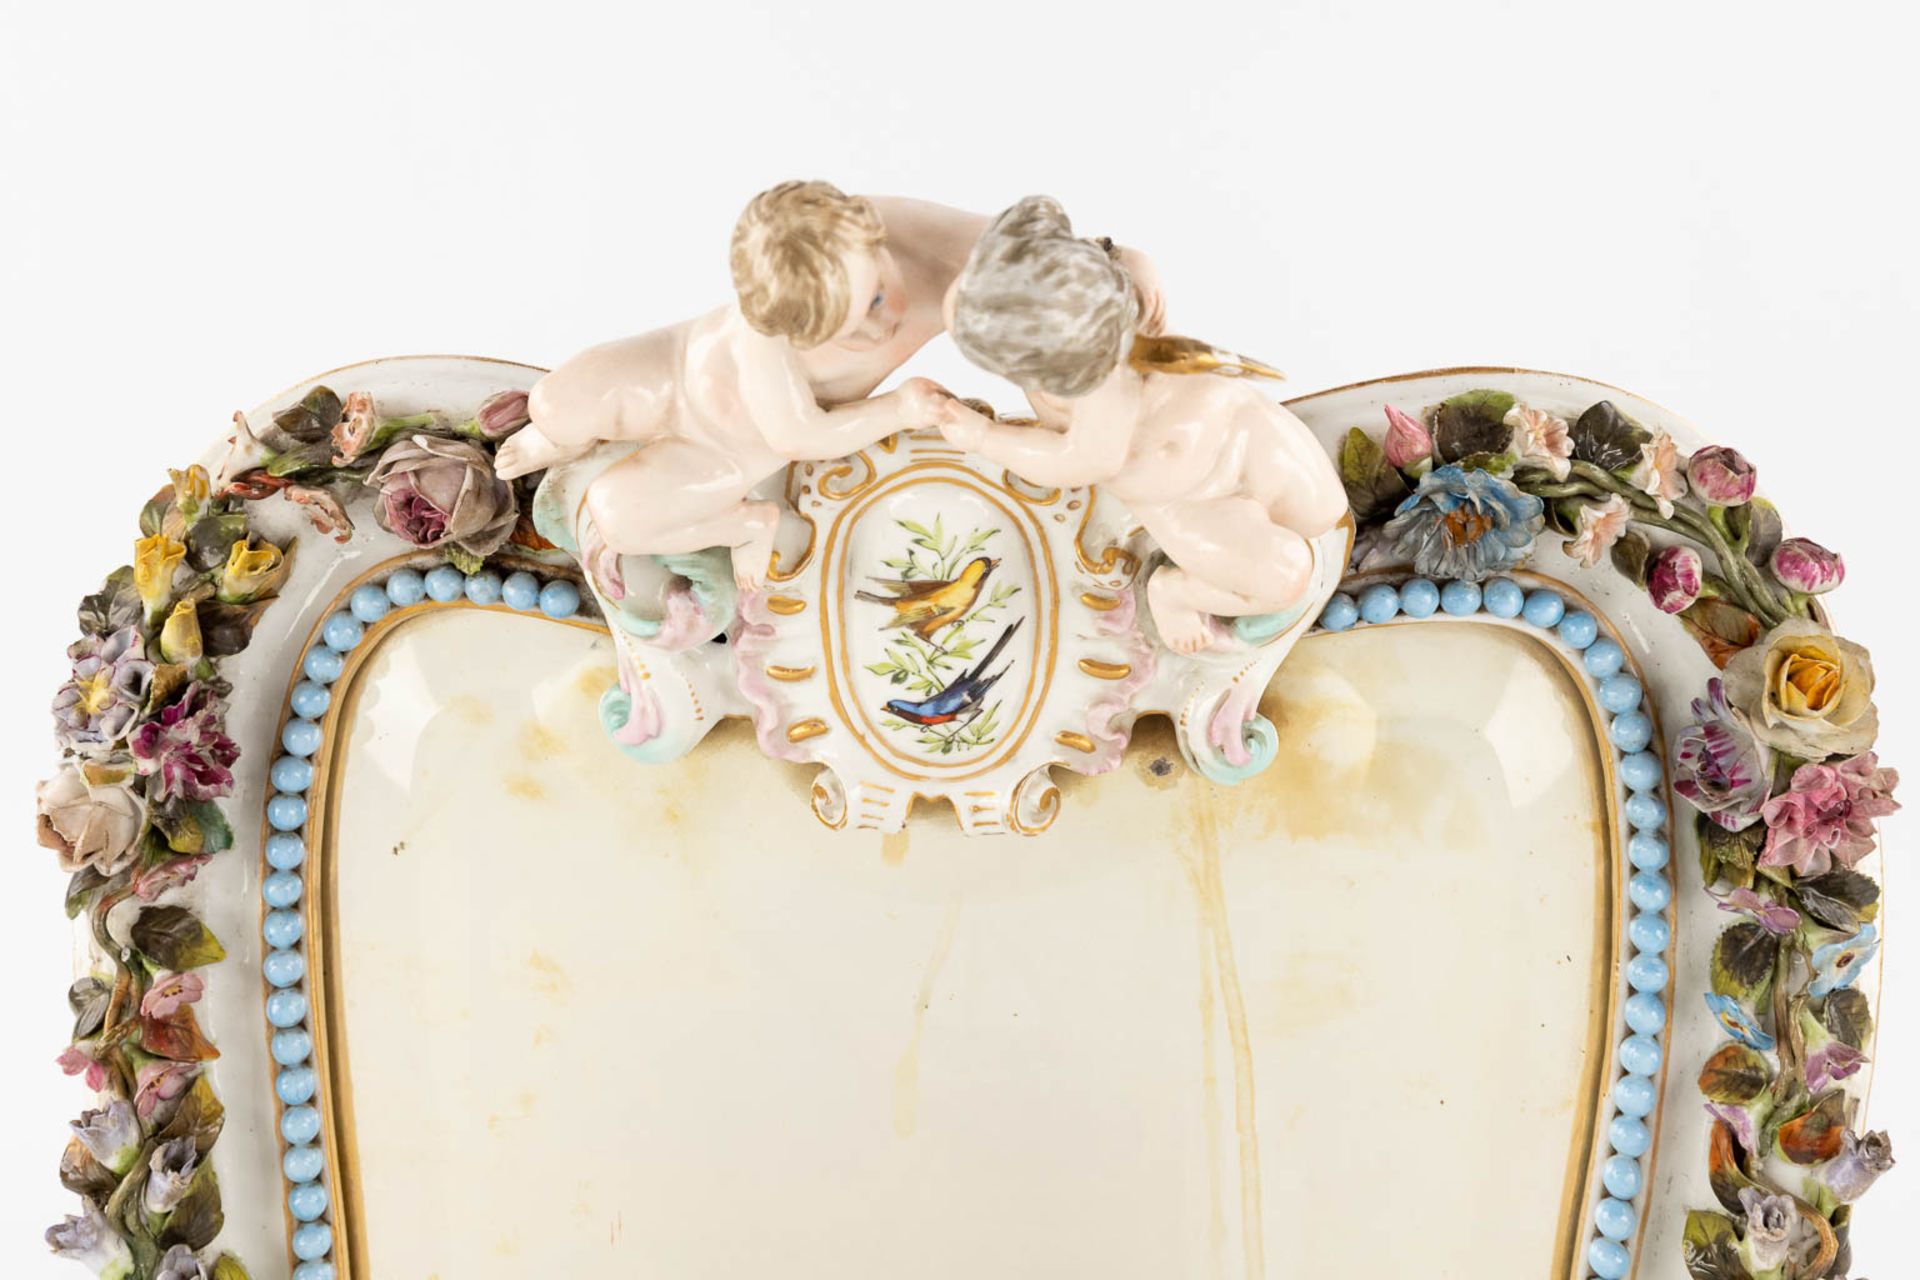 JACOB-PETIT (1796-1868) 'Table Mirror' made of porcelain. 19th C. (W:38 x H:51 cm) - Image 13 of 19